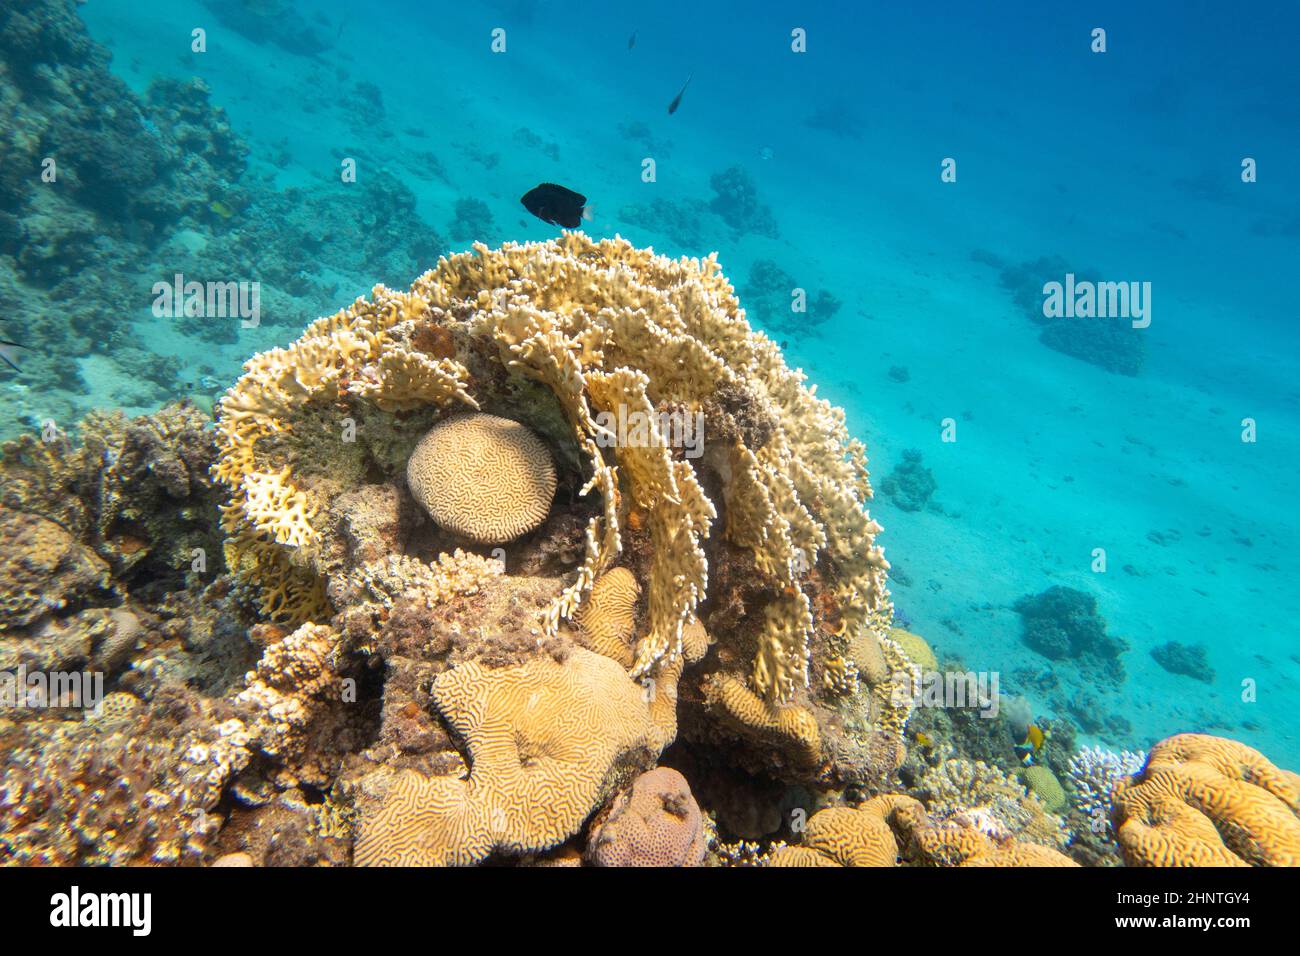 Colorful, picturesque coral reef at the bottom of tropical sea, fire and brain corals, underwater landscape Stock Photo